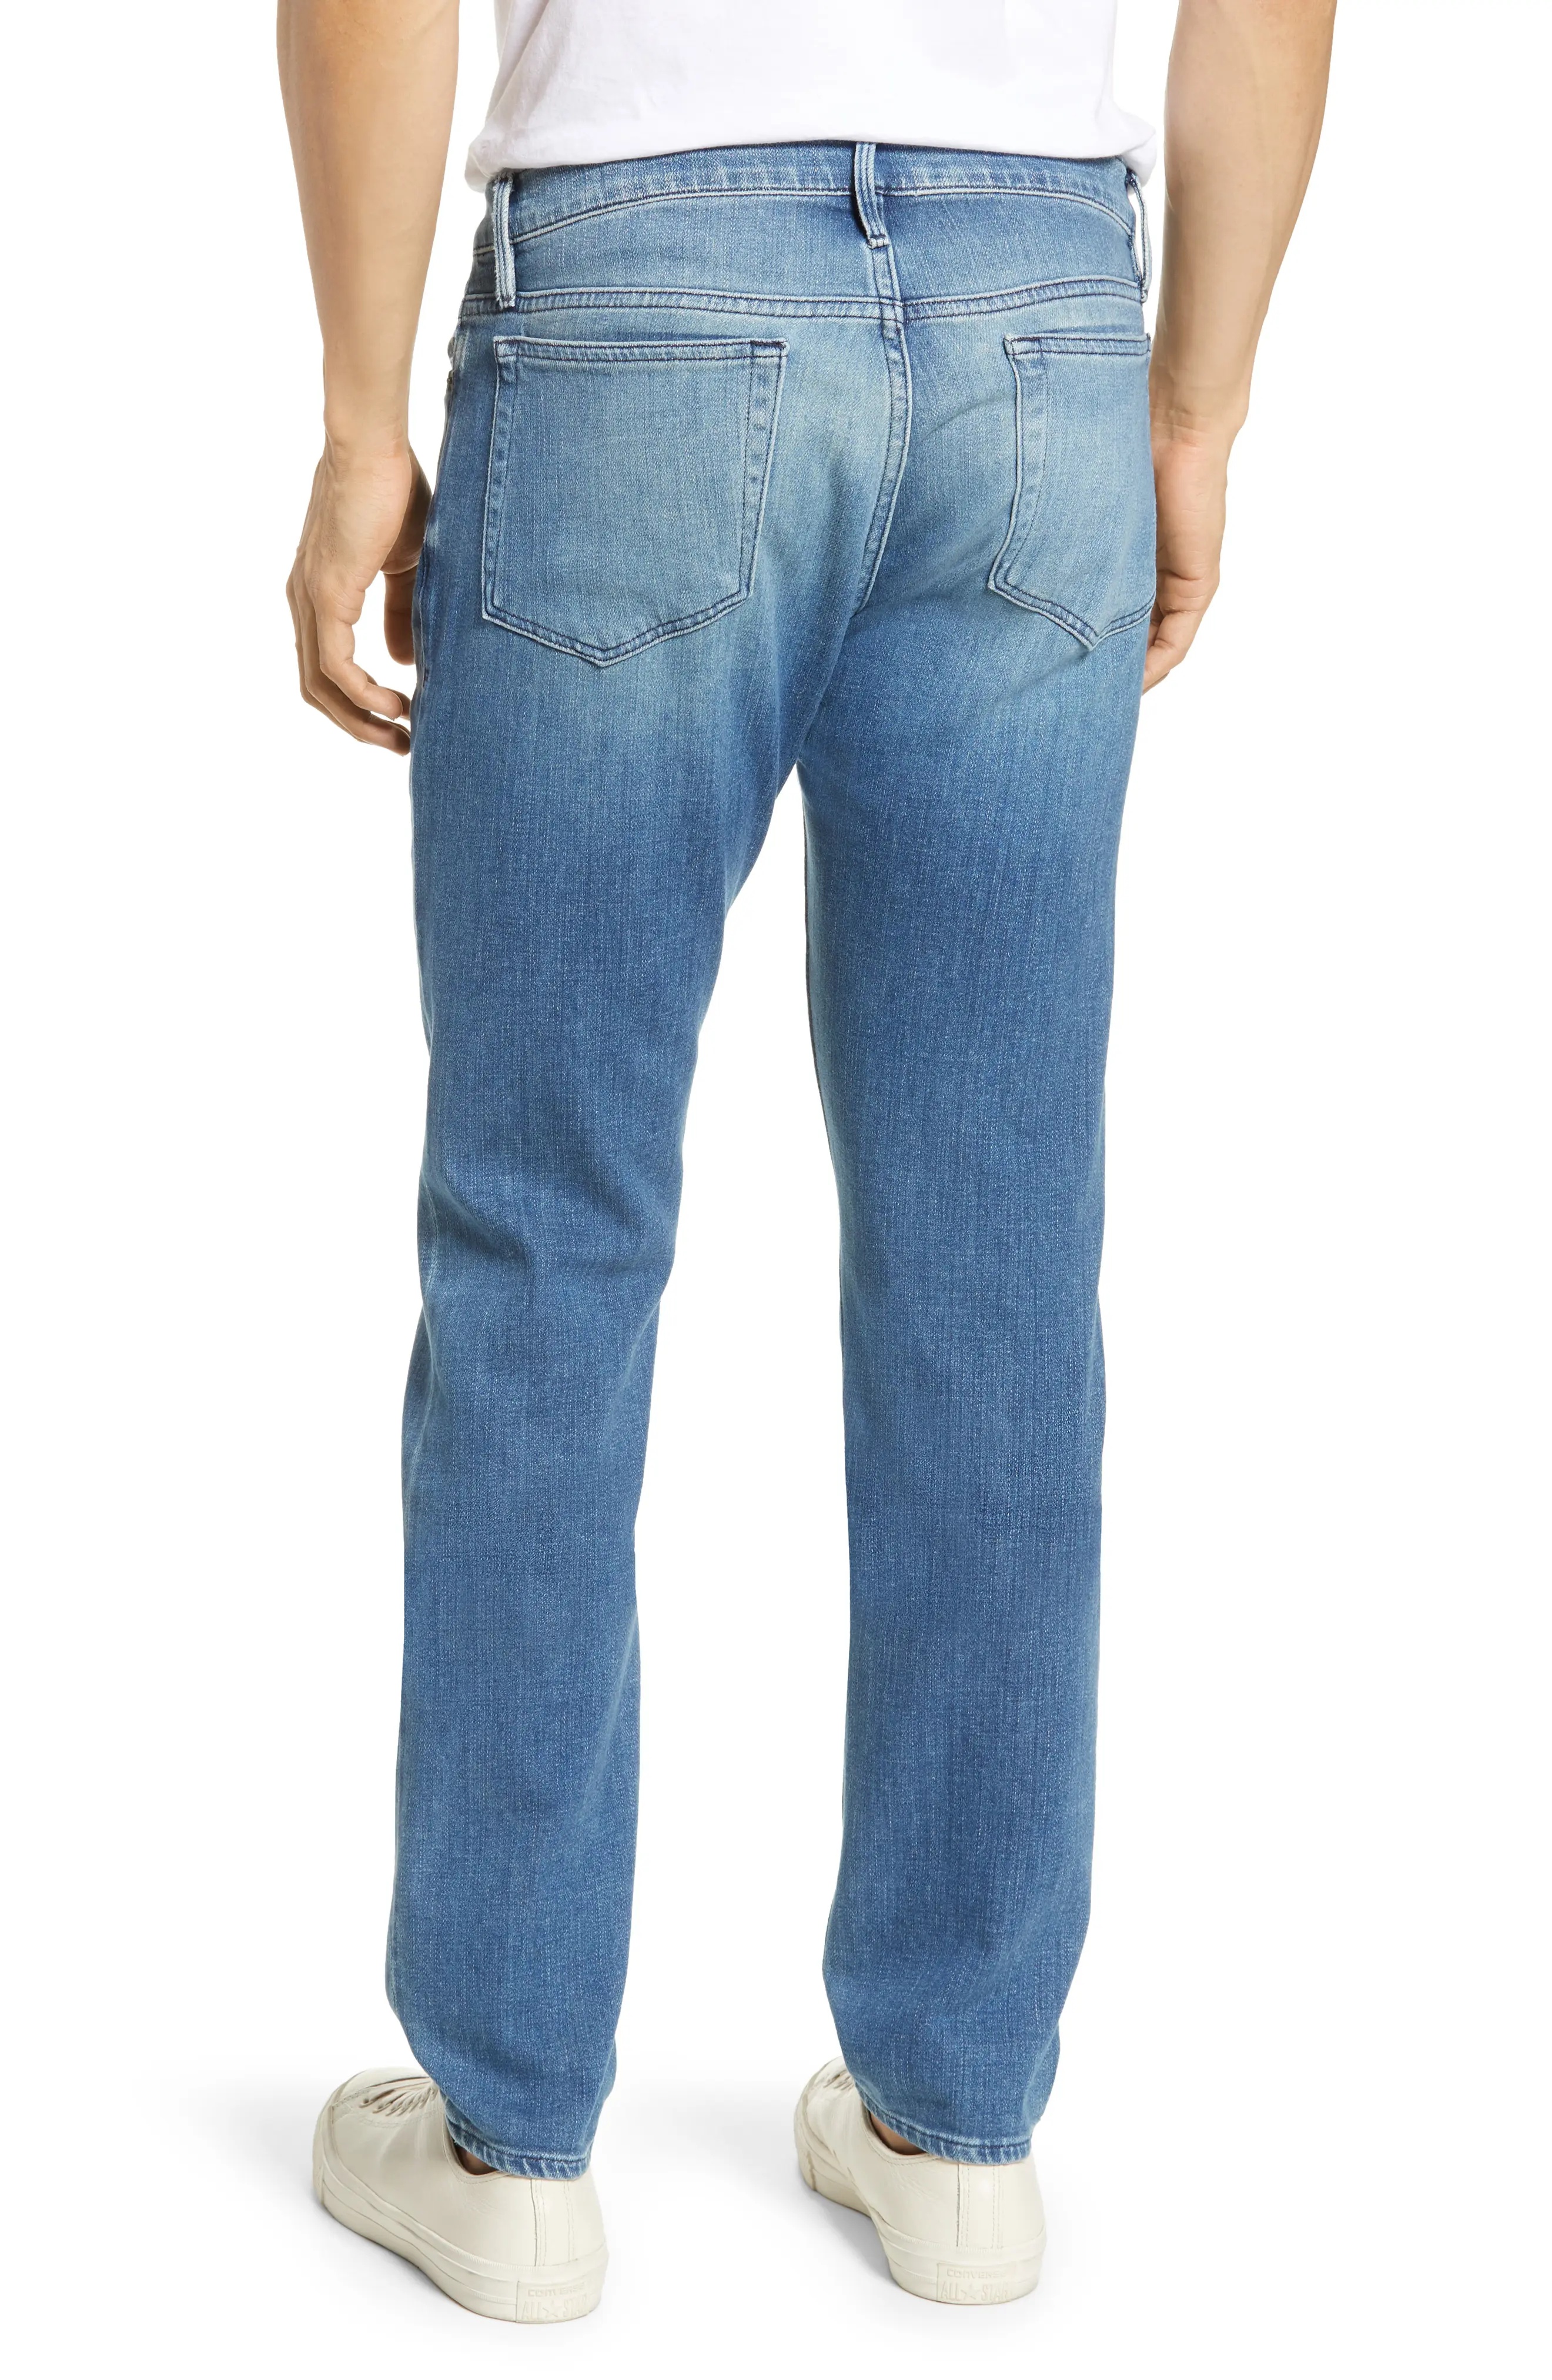 L'Homme Skinny Fit Jeans - 2